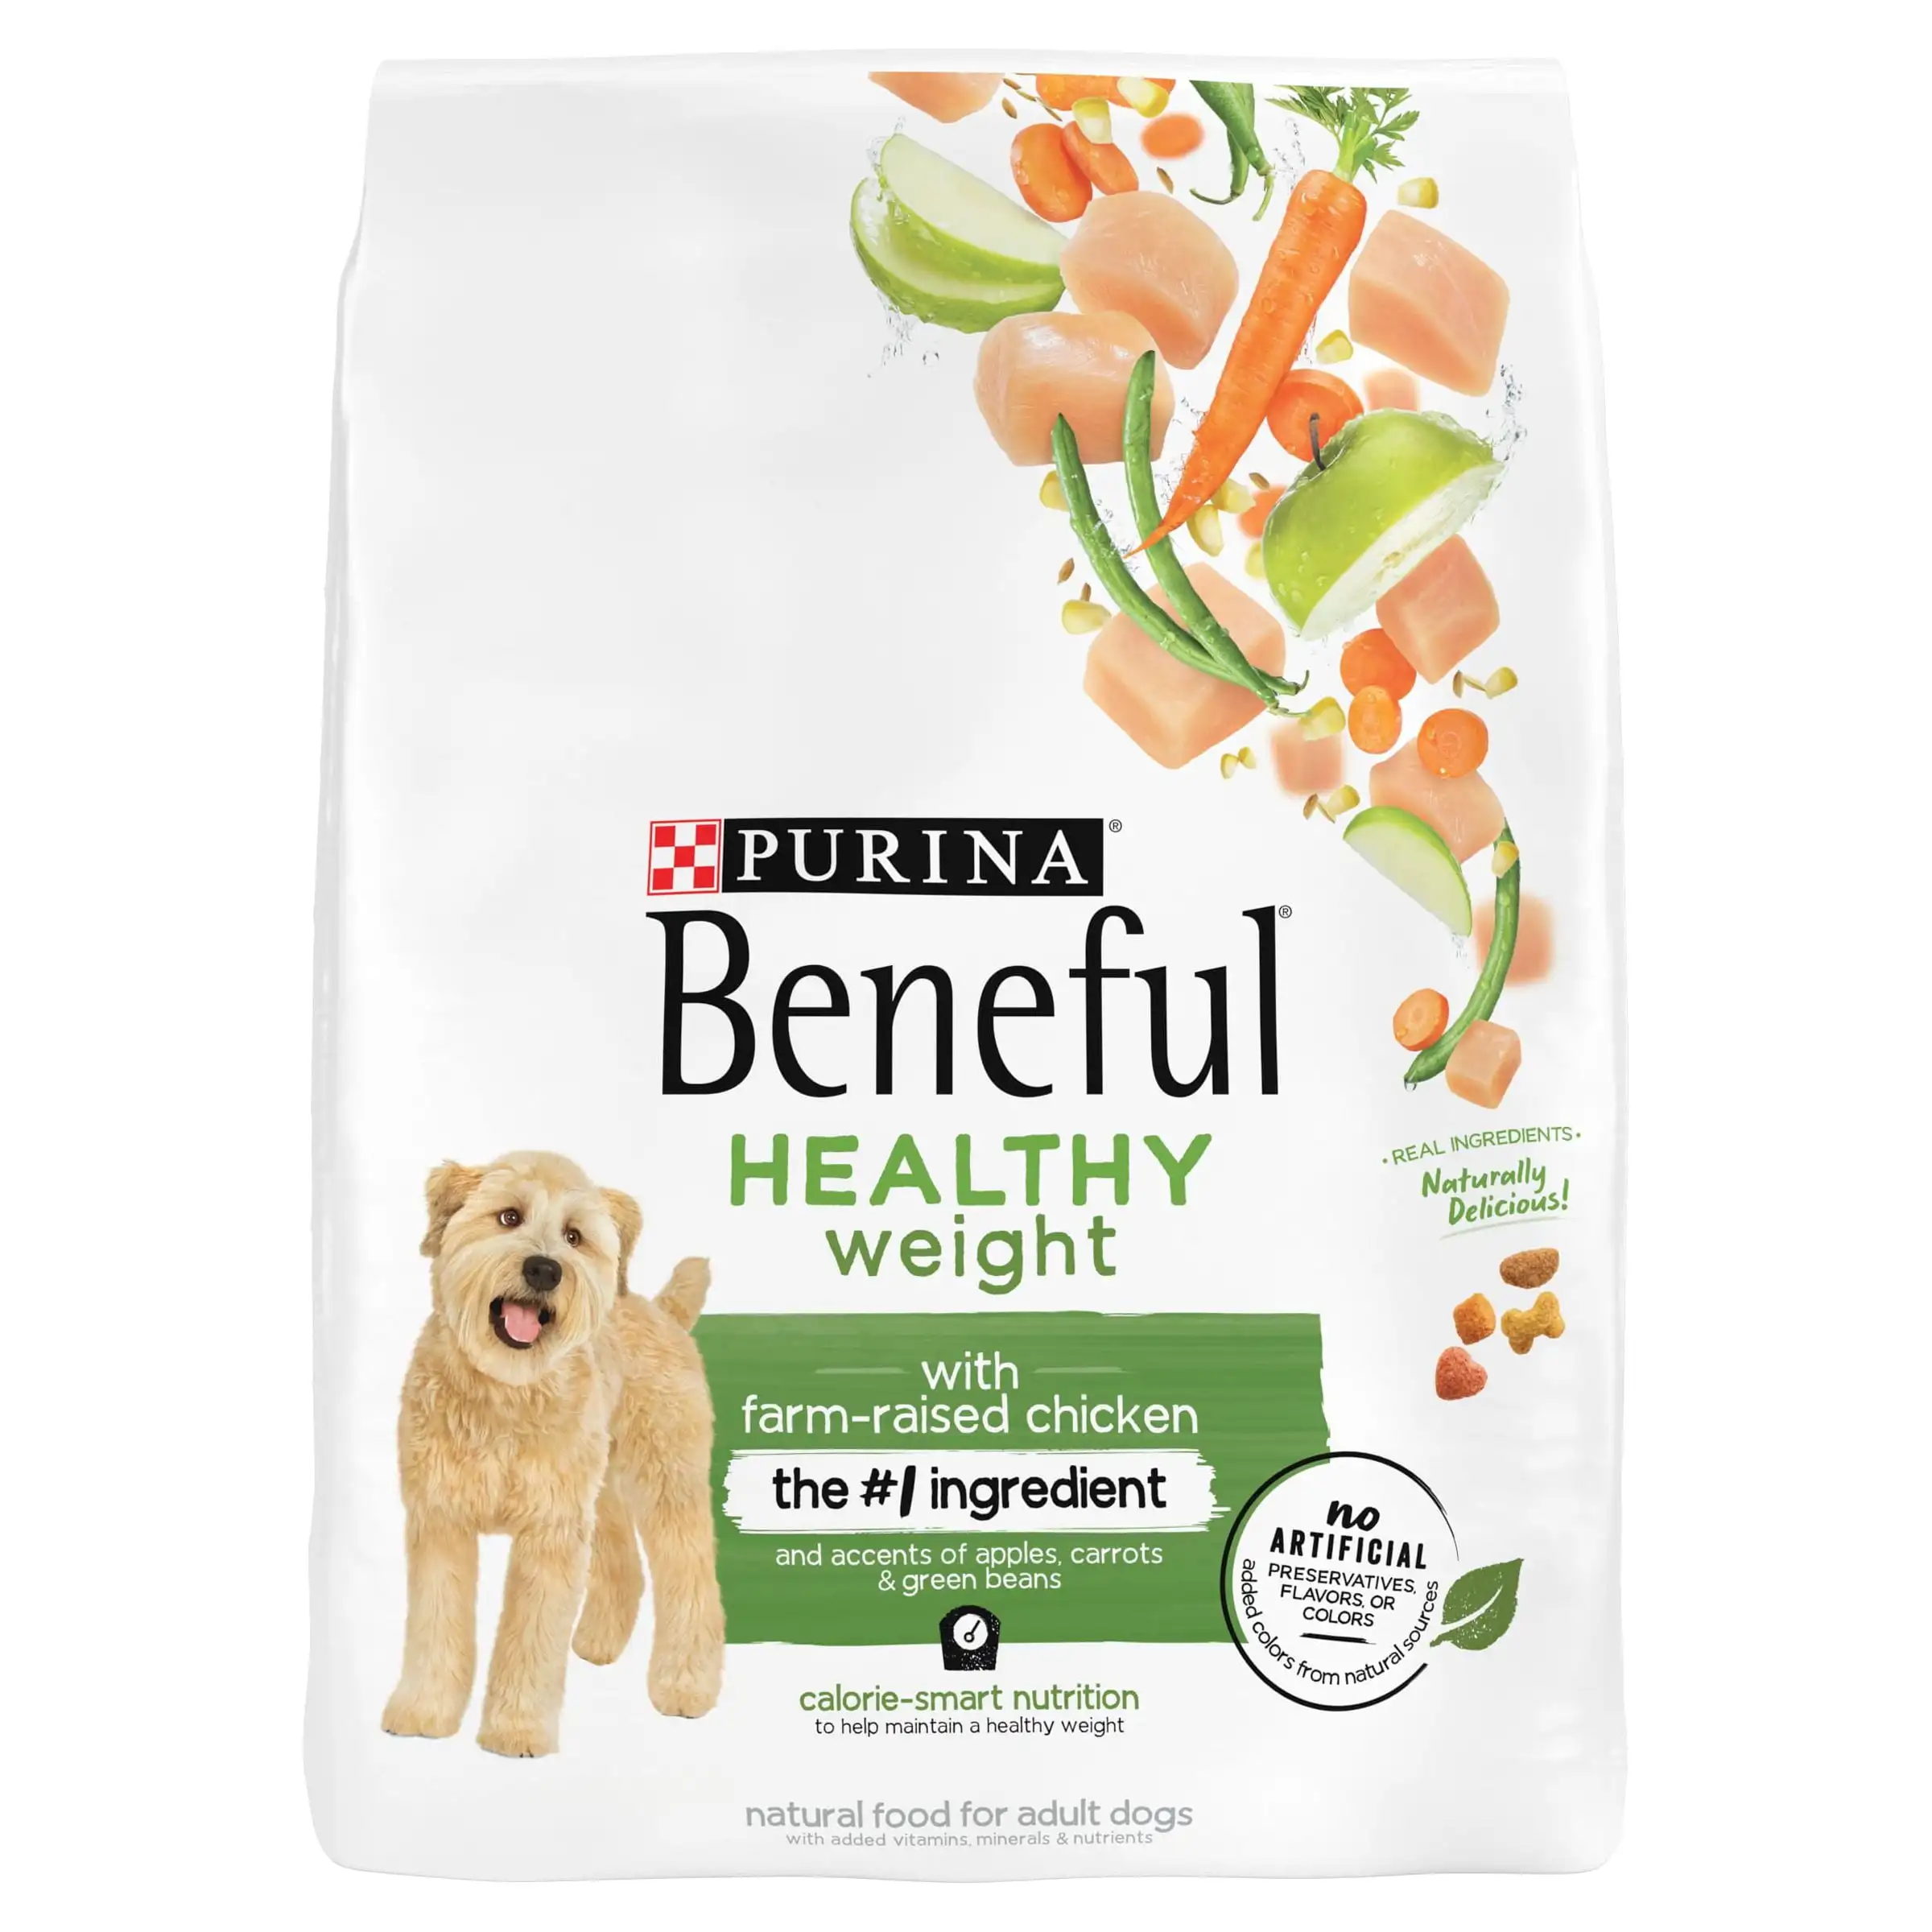 

Purina Beneful Dry Dog Food for Adults Healthy Weight, High Protein Farm Raised Chicken, 28 lb Bag